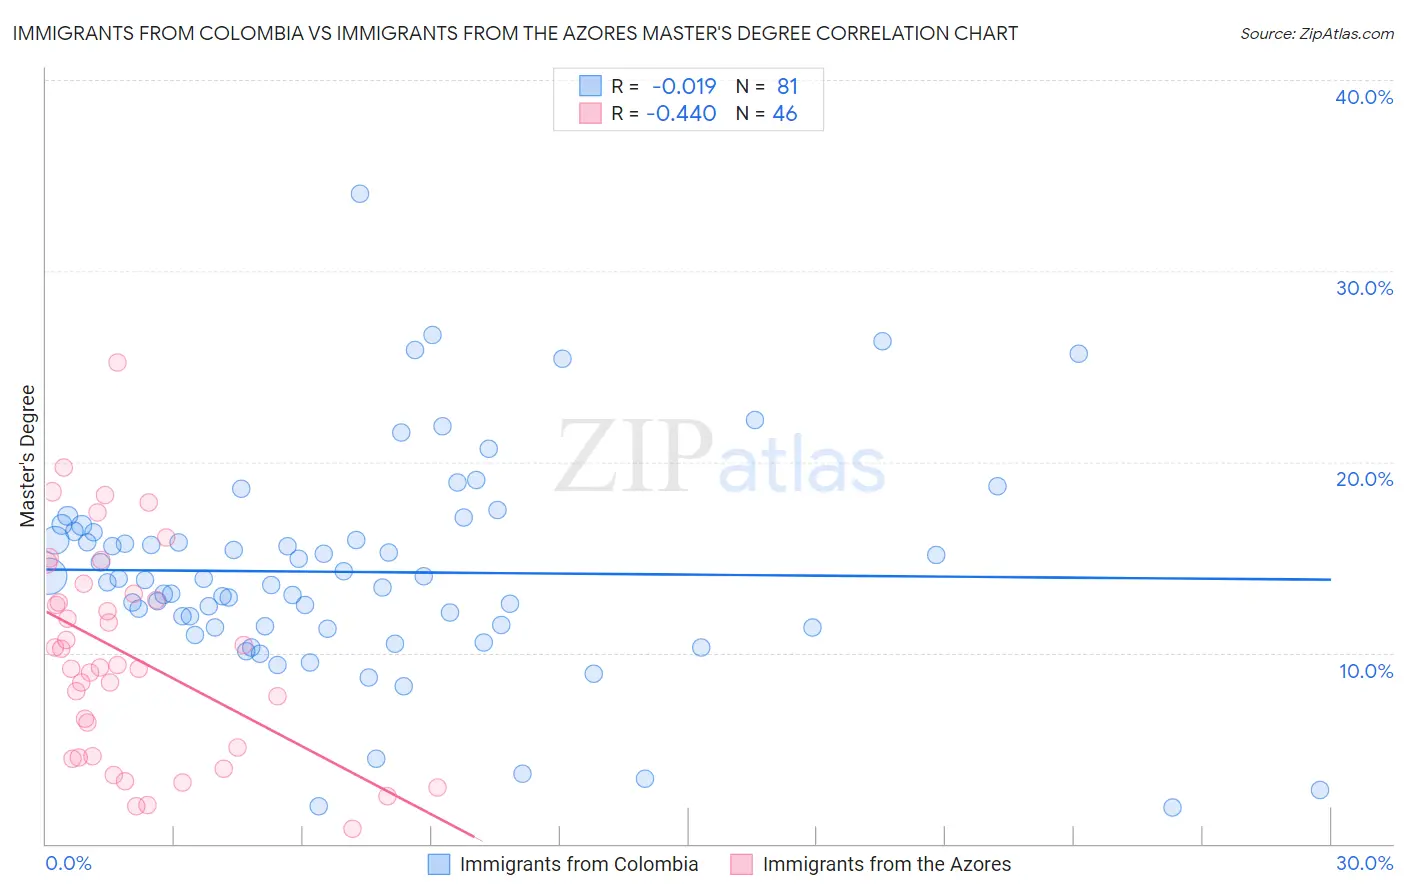 Immigrants from Colombia vs Immigrants from the Azores Master's Degree